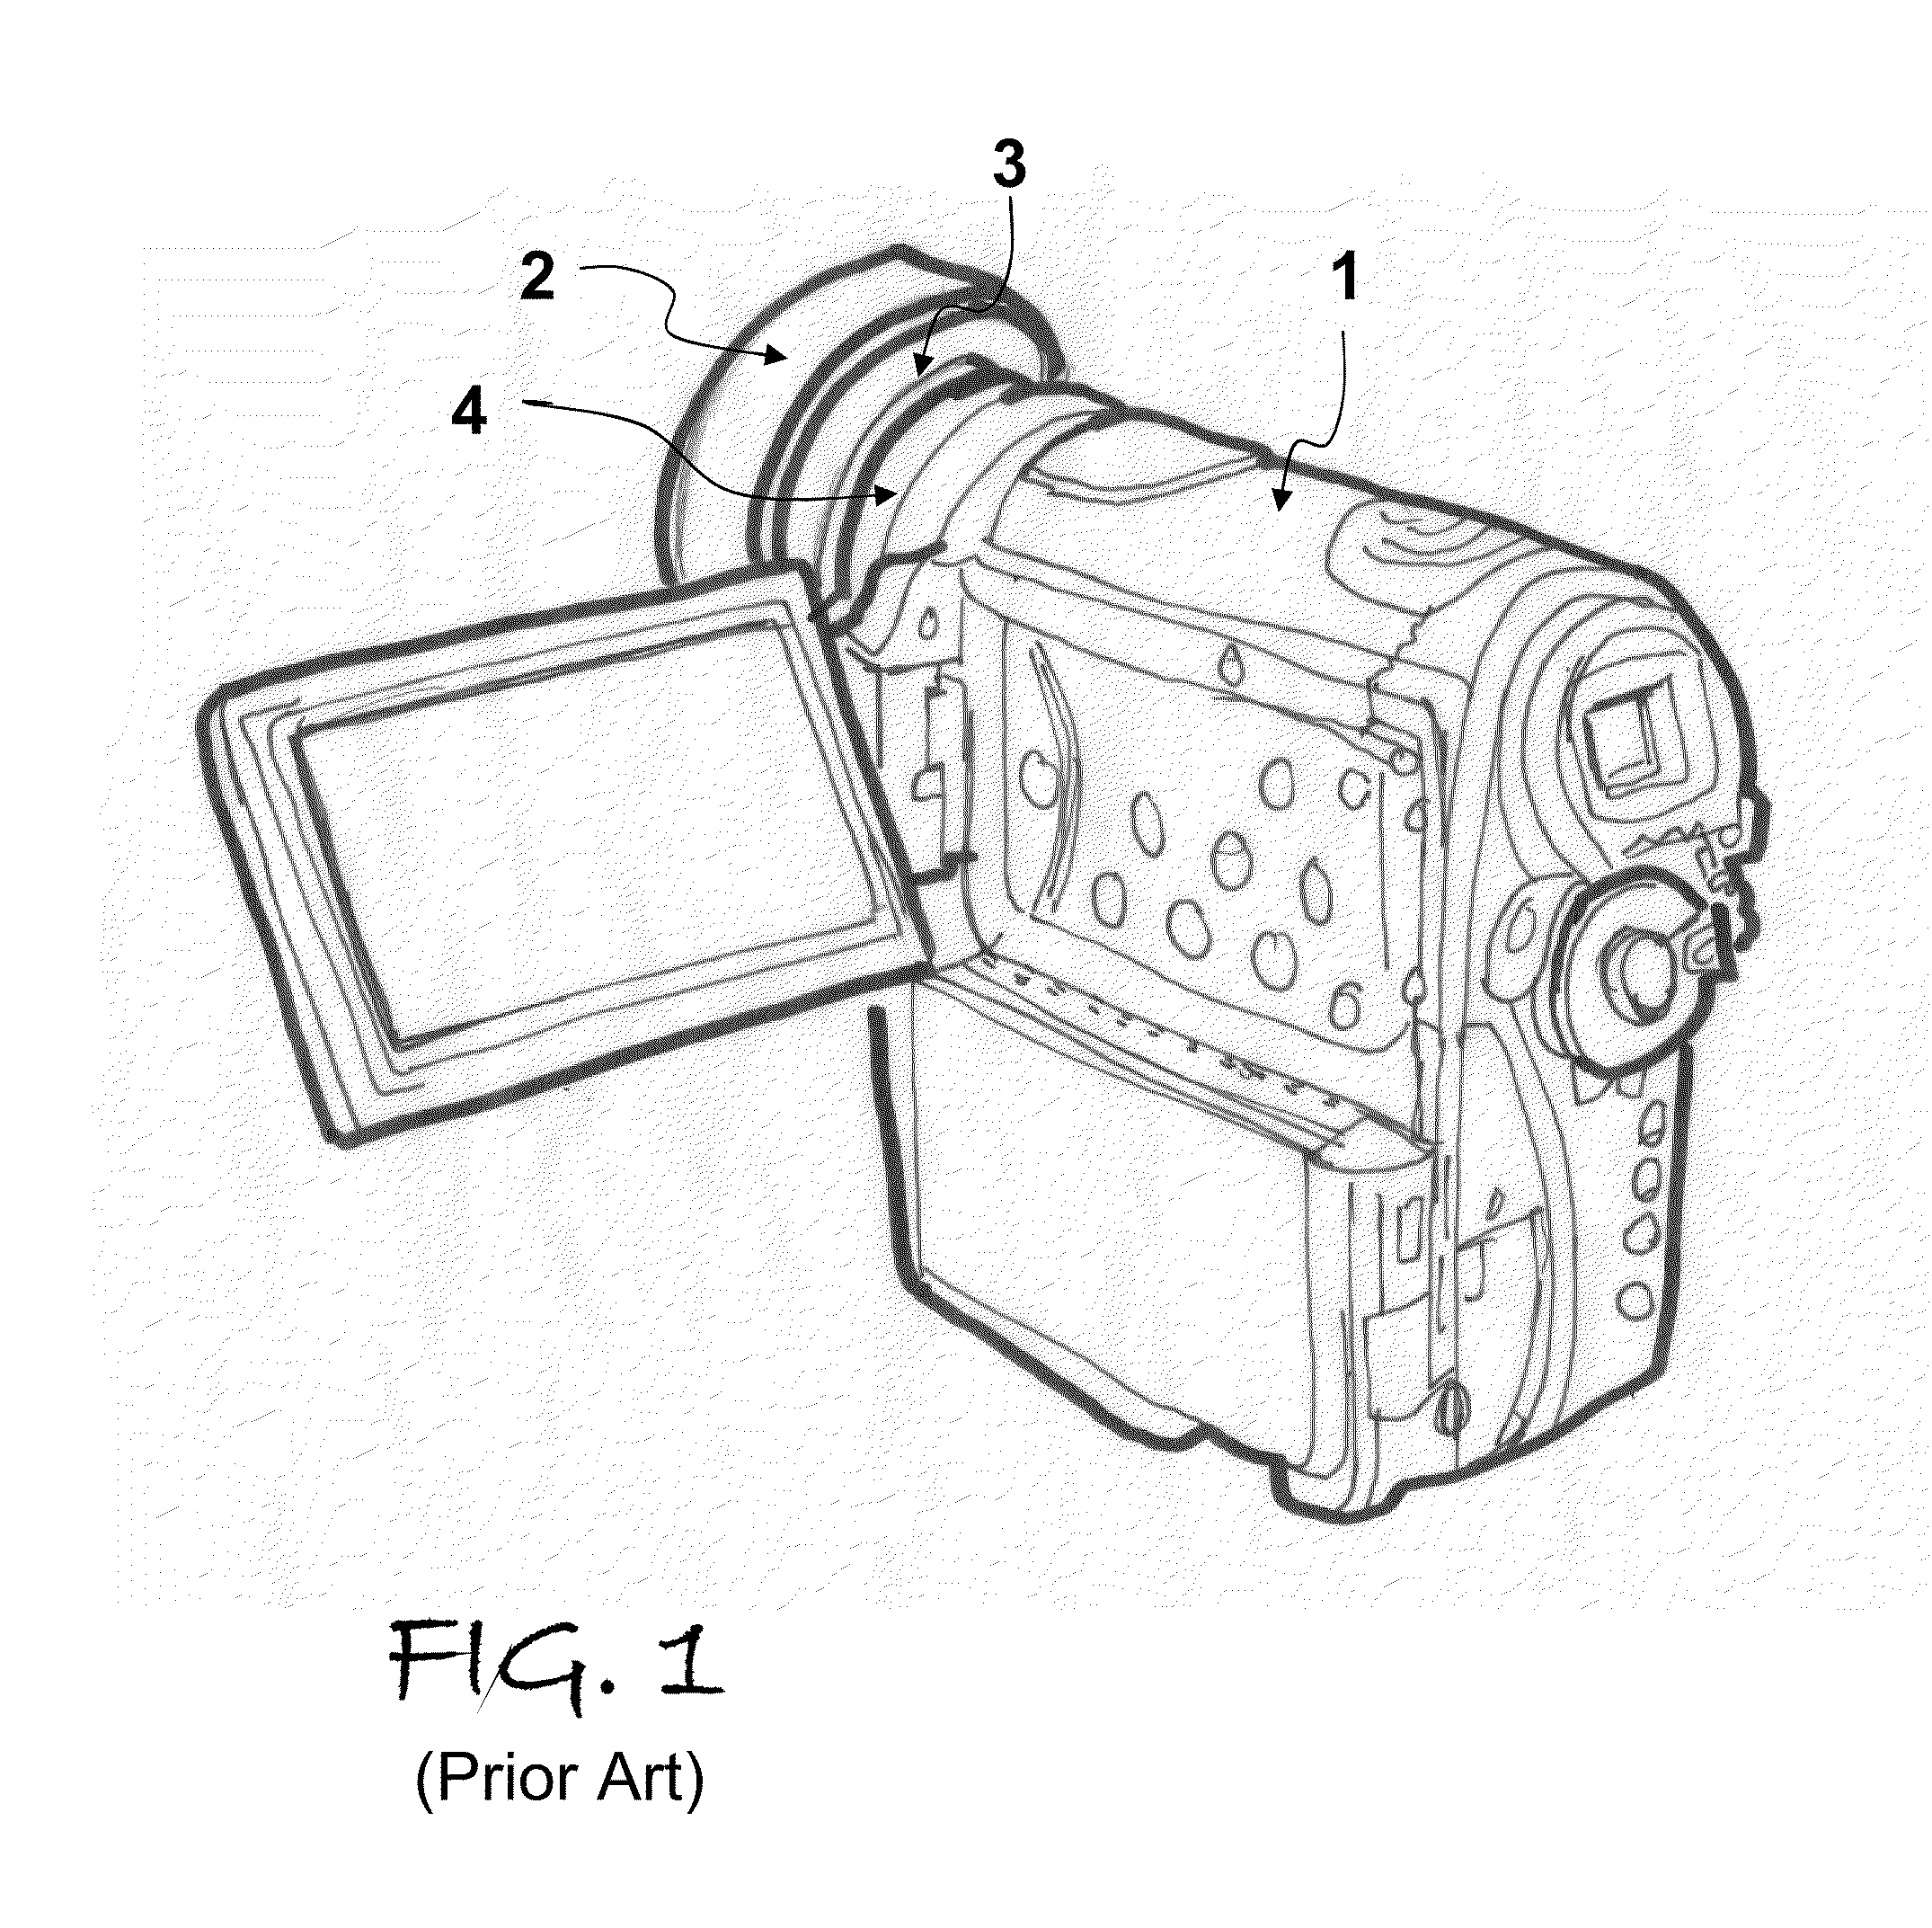 Panoramic adapter system and method with spherical field-of-view coverage